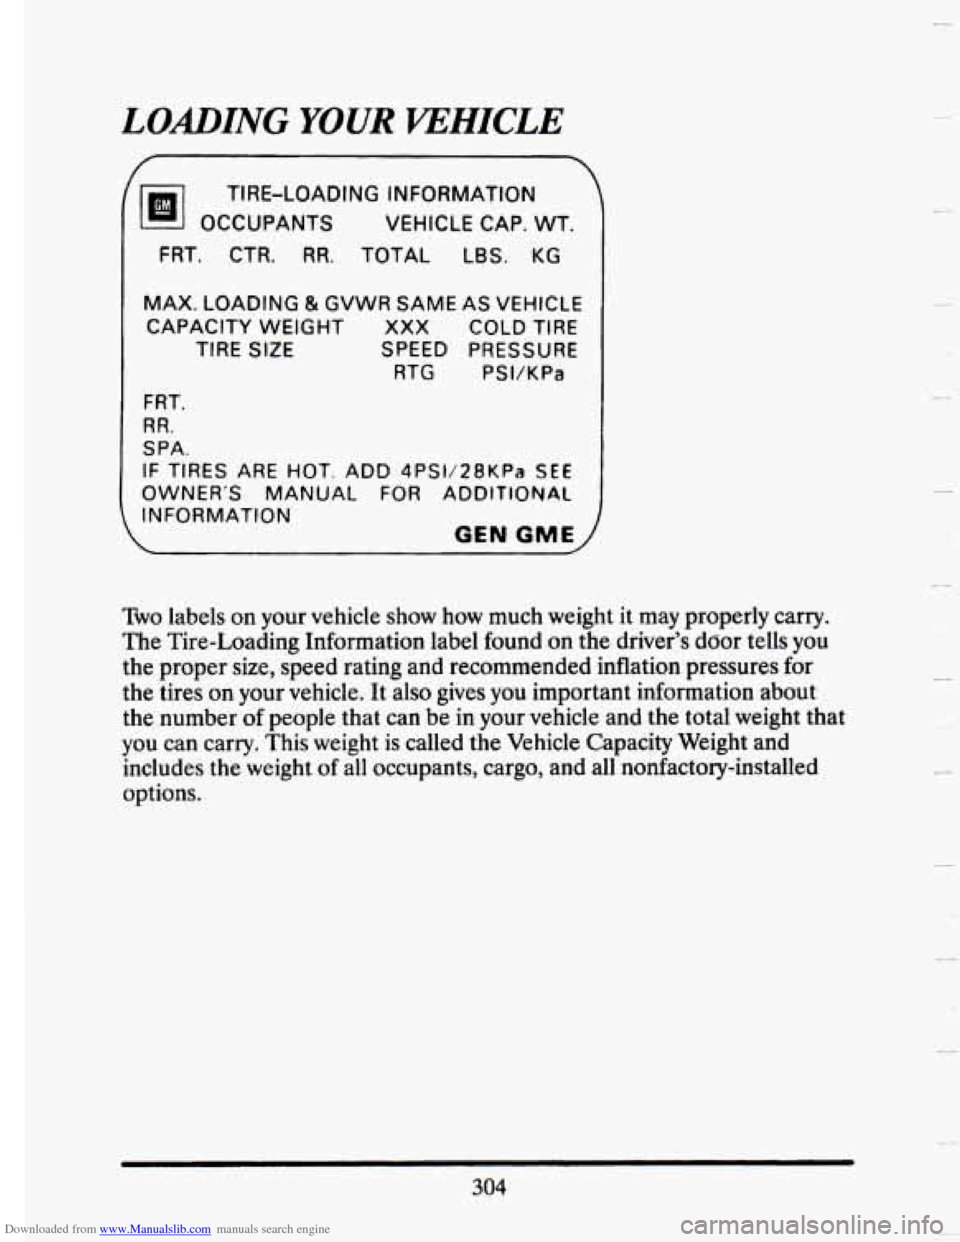 CADILLAC SEVILLE 1993 4.G Owners Manual Downloaded from www.Manualslib.com manuals search engine LOplDING  YOUR KEHICLE 
 
TIRE-LOADING INFORMATION 
‘m OCCUPANTS  VEHICLE CAP. WT. 
FRT. CTR. RR. TOTAL  LBS. KG 
MAX.  LOADING & GVWR  SAME 